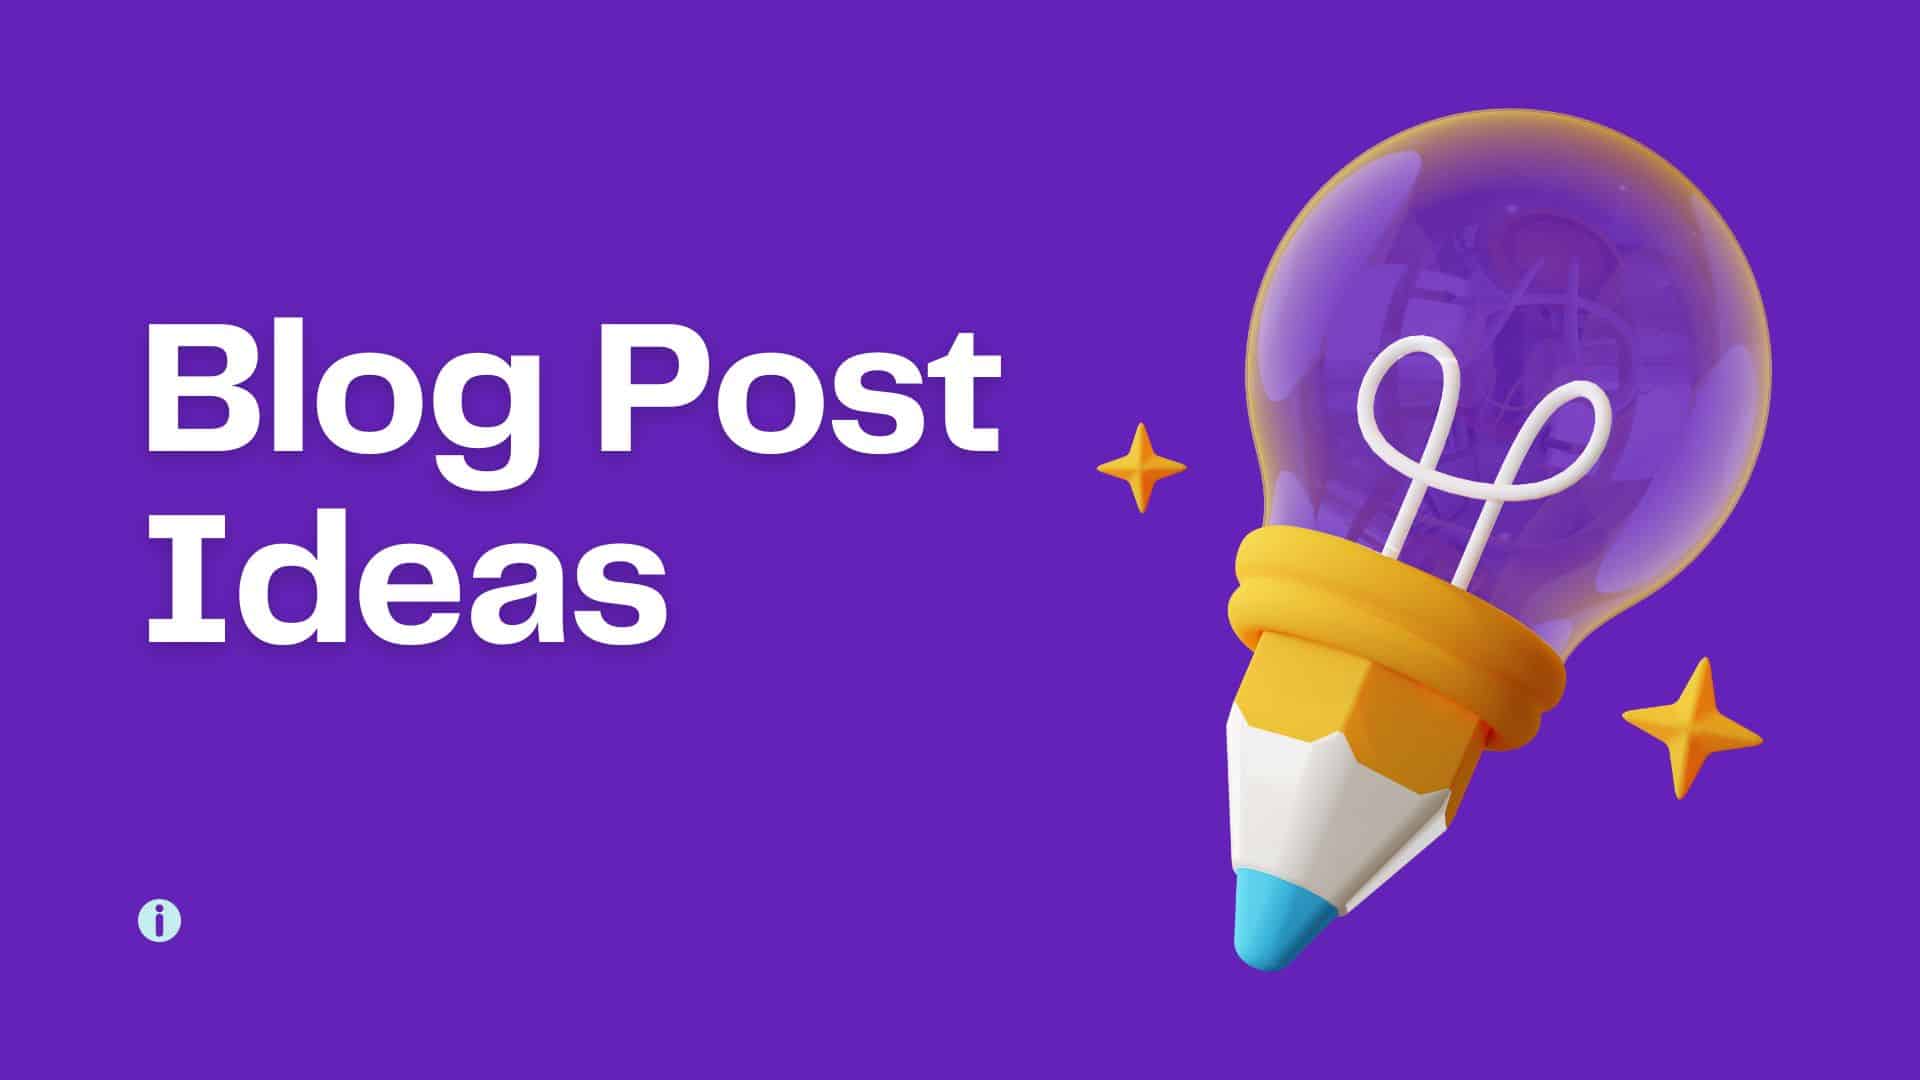 150 Blog Post Ideas to Attract More Visitors to Your Blog